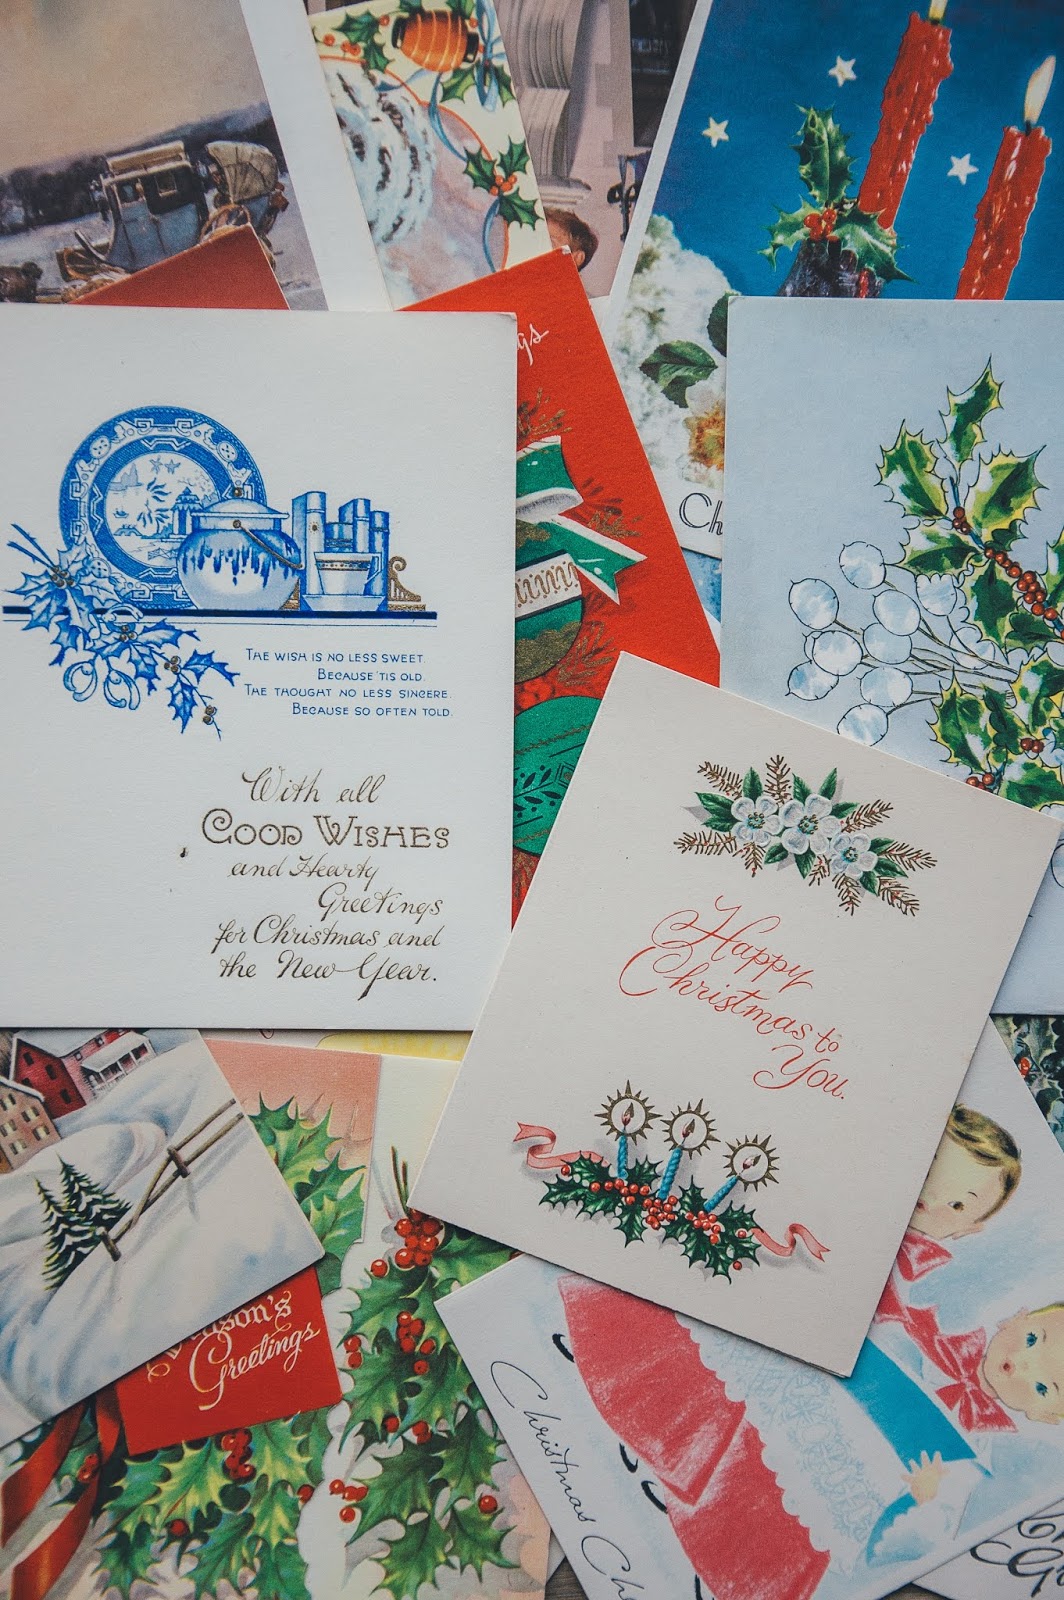 It's 5 days to Christmas, are your Christmas Holiday Greeting cards ready?